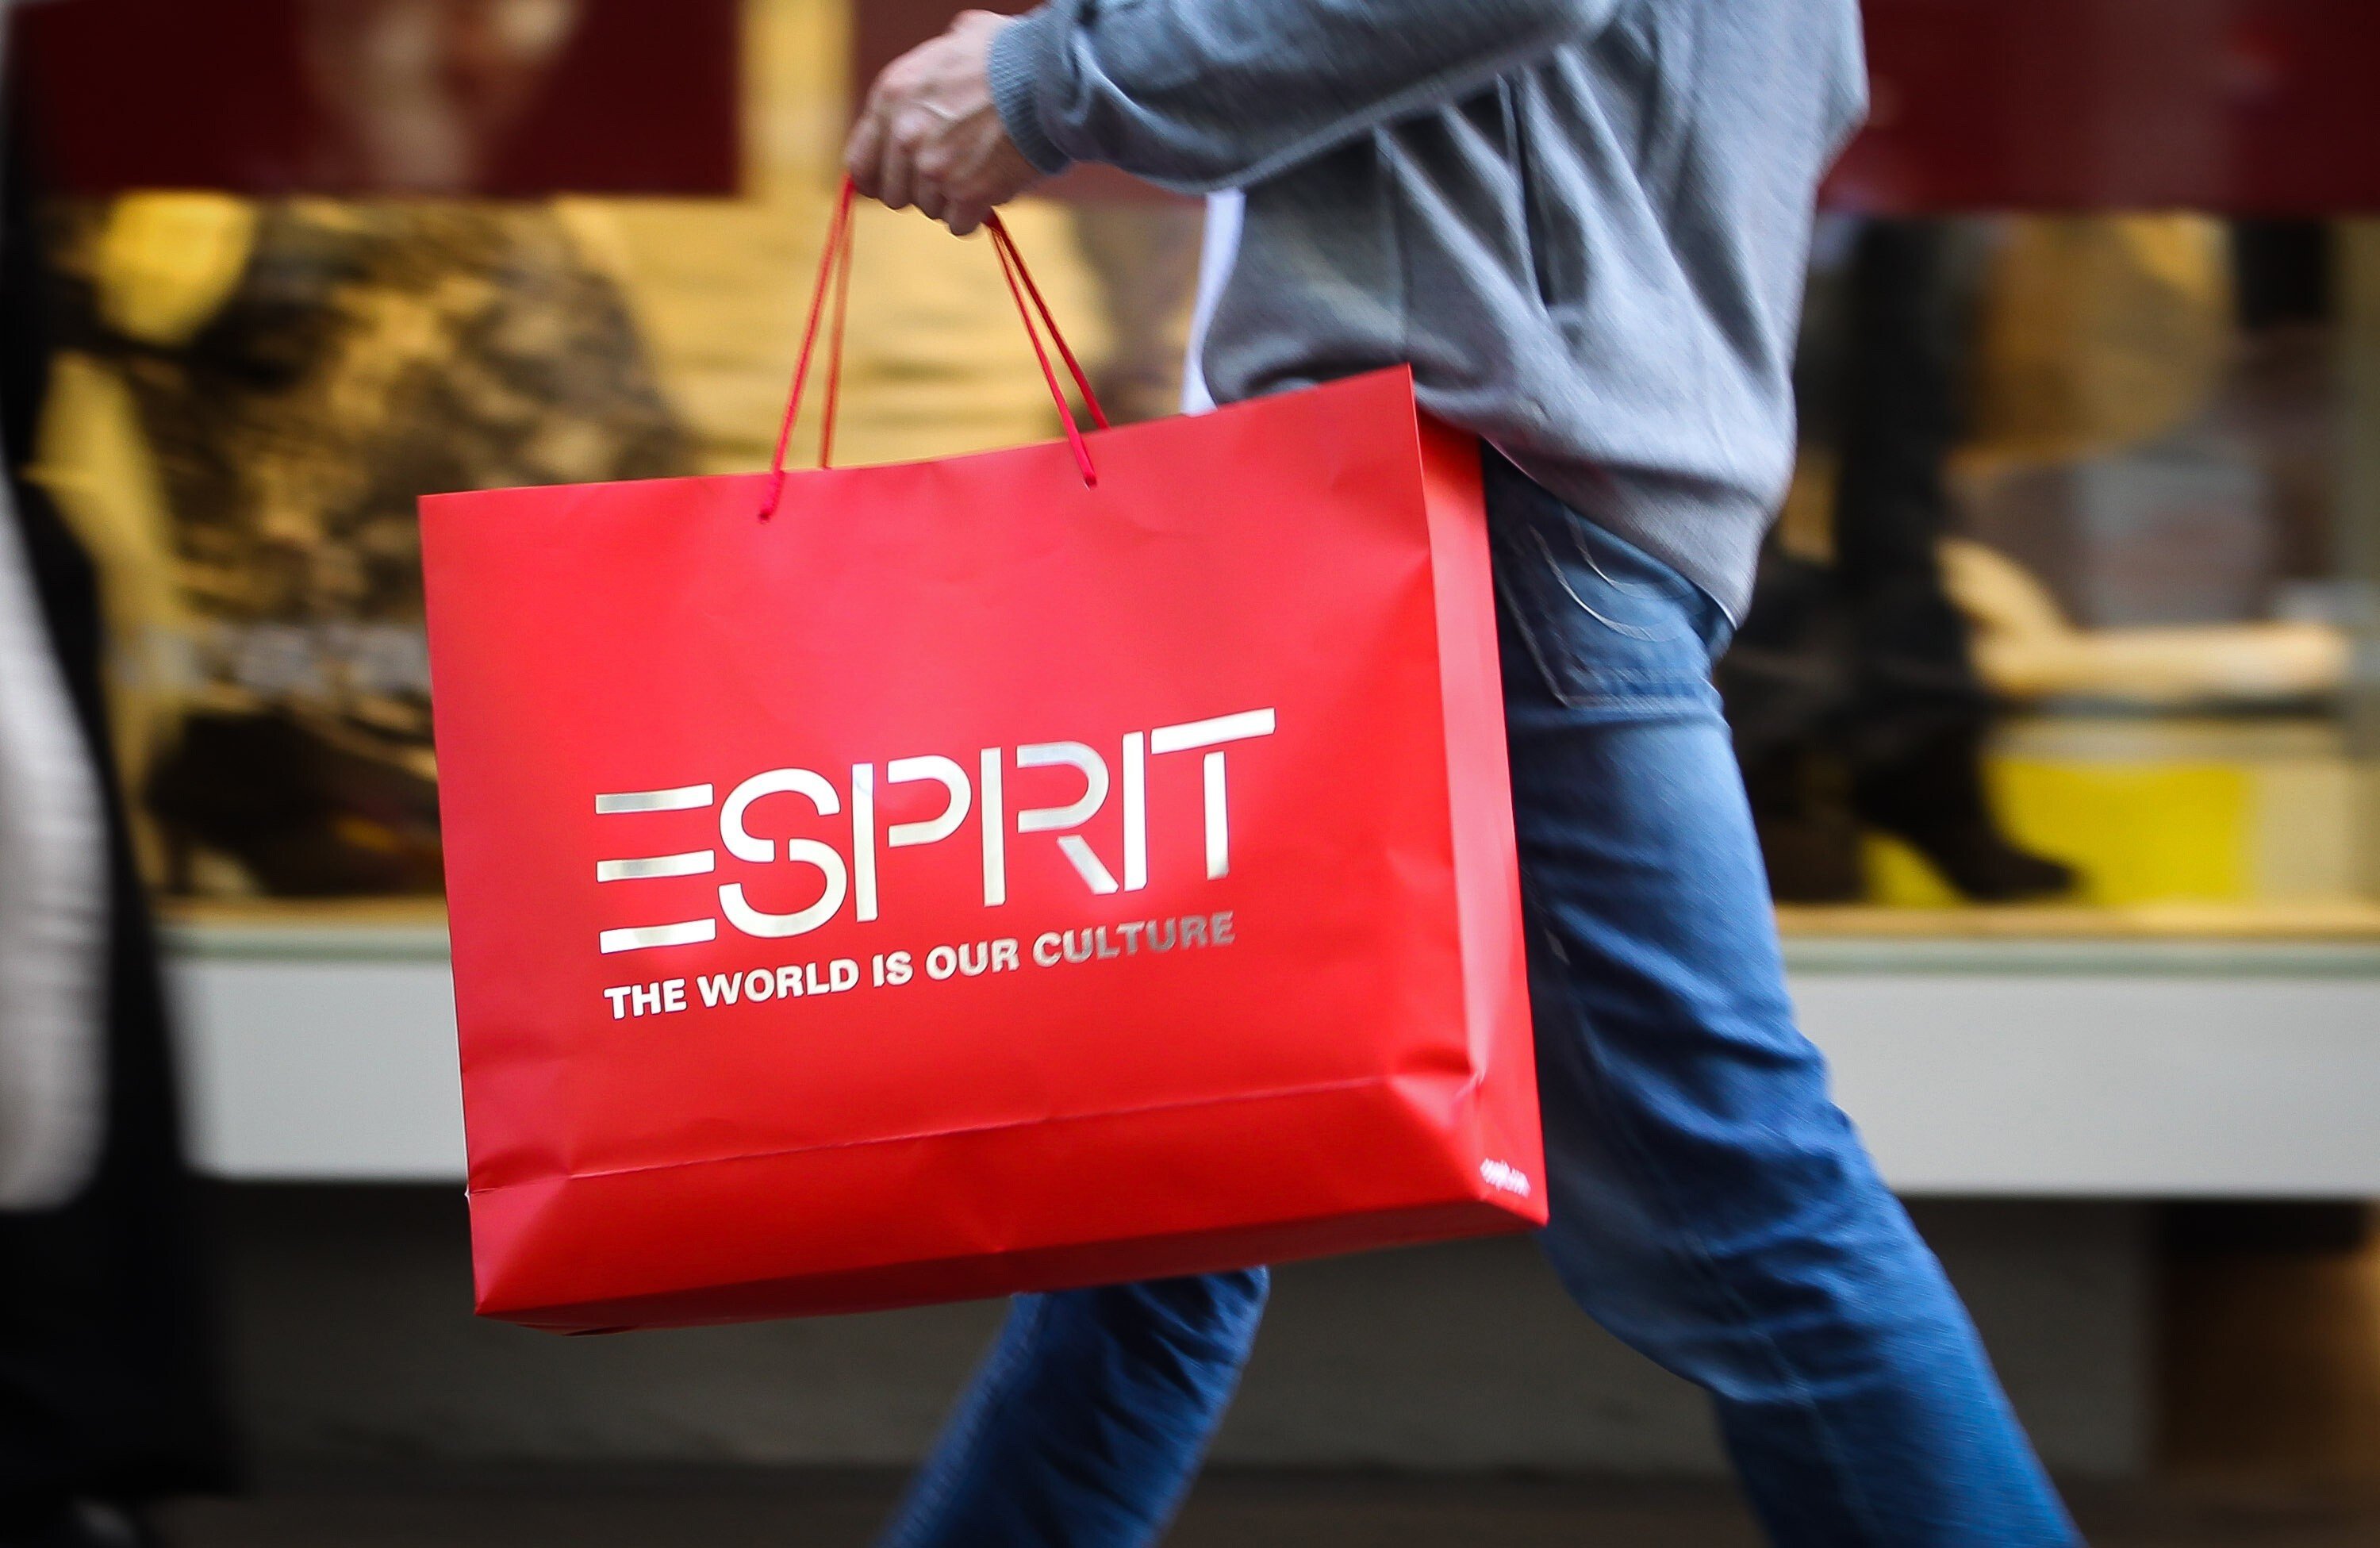 The shops Esprit is closing in Asia represent less than 4 per cent of the group’s global turnover. Photo: Bloomberg